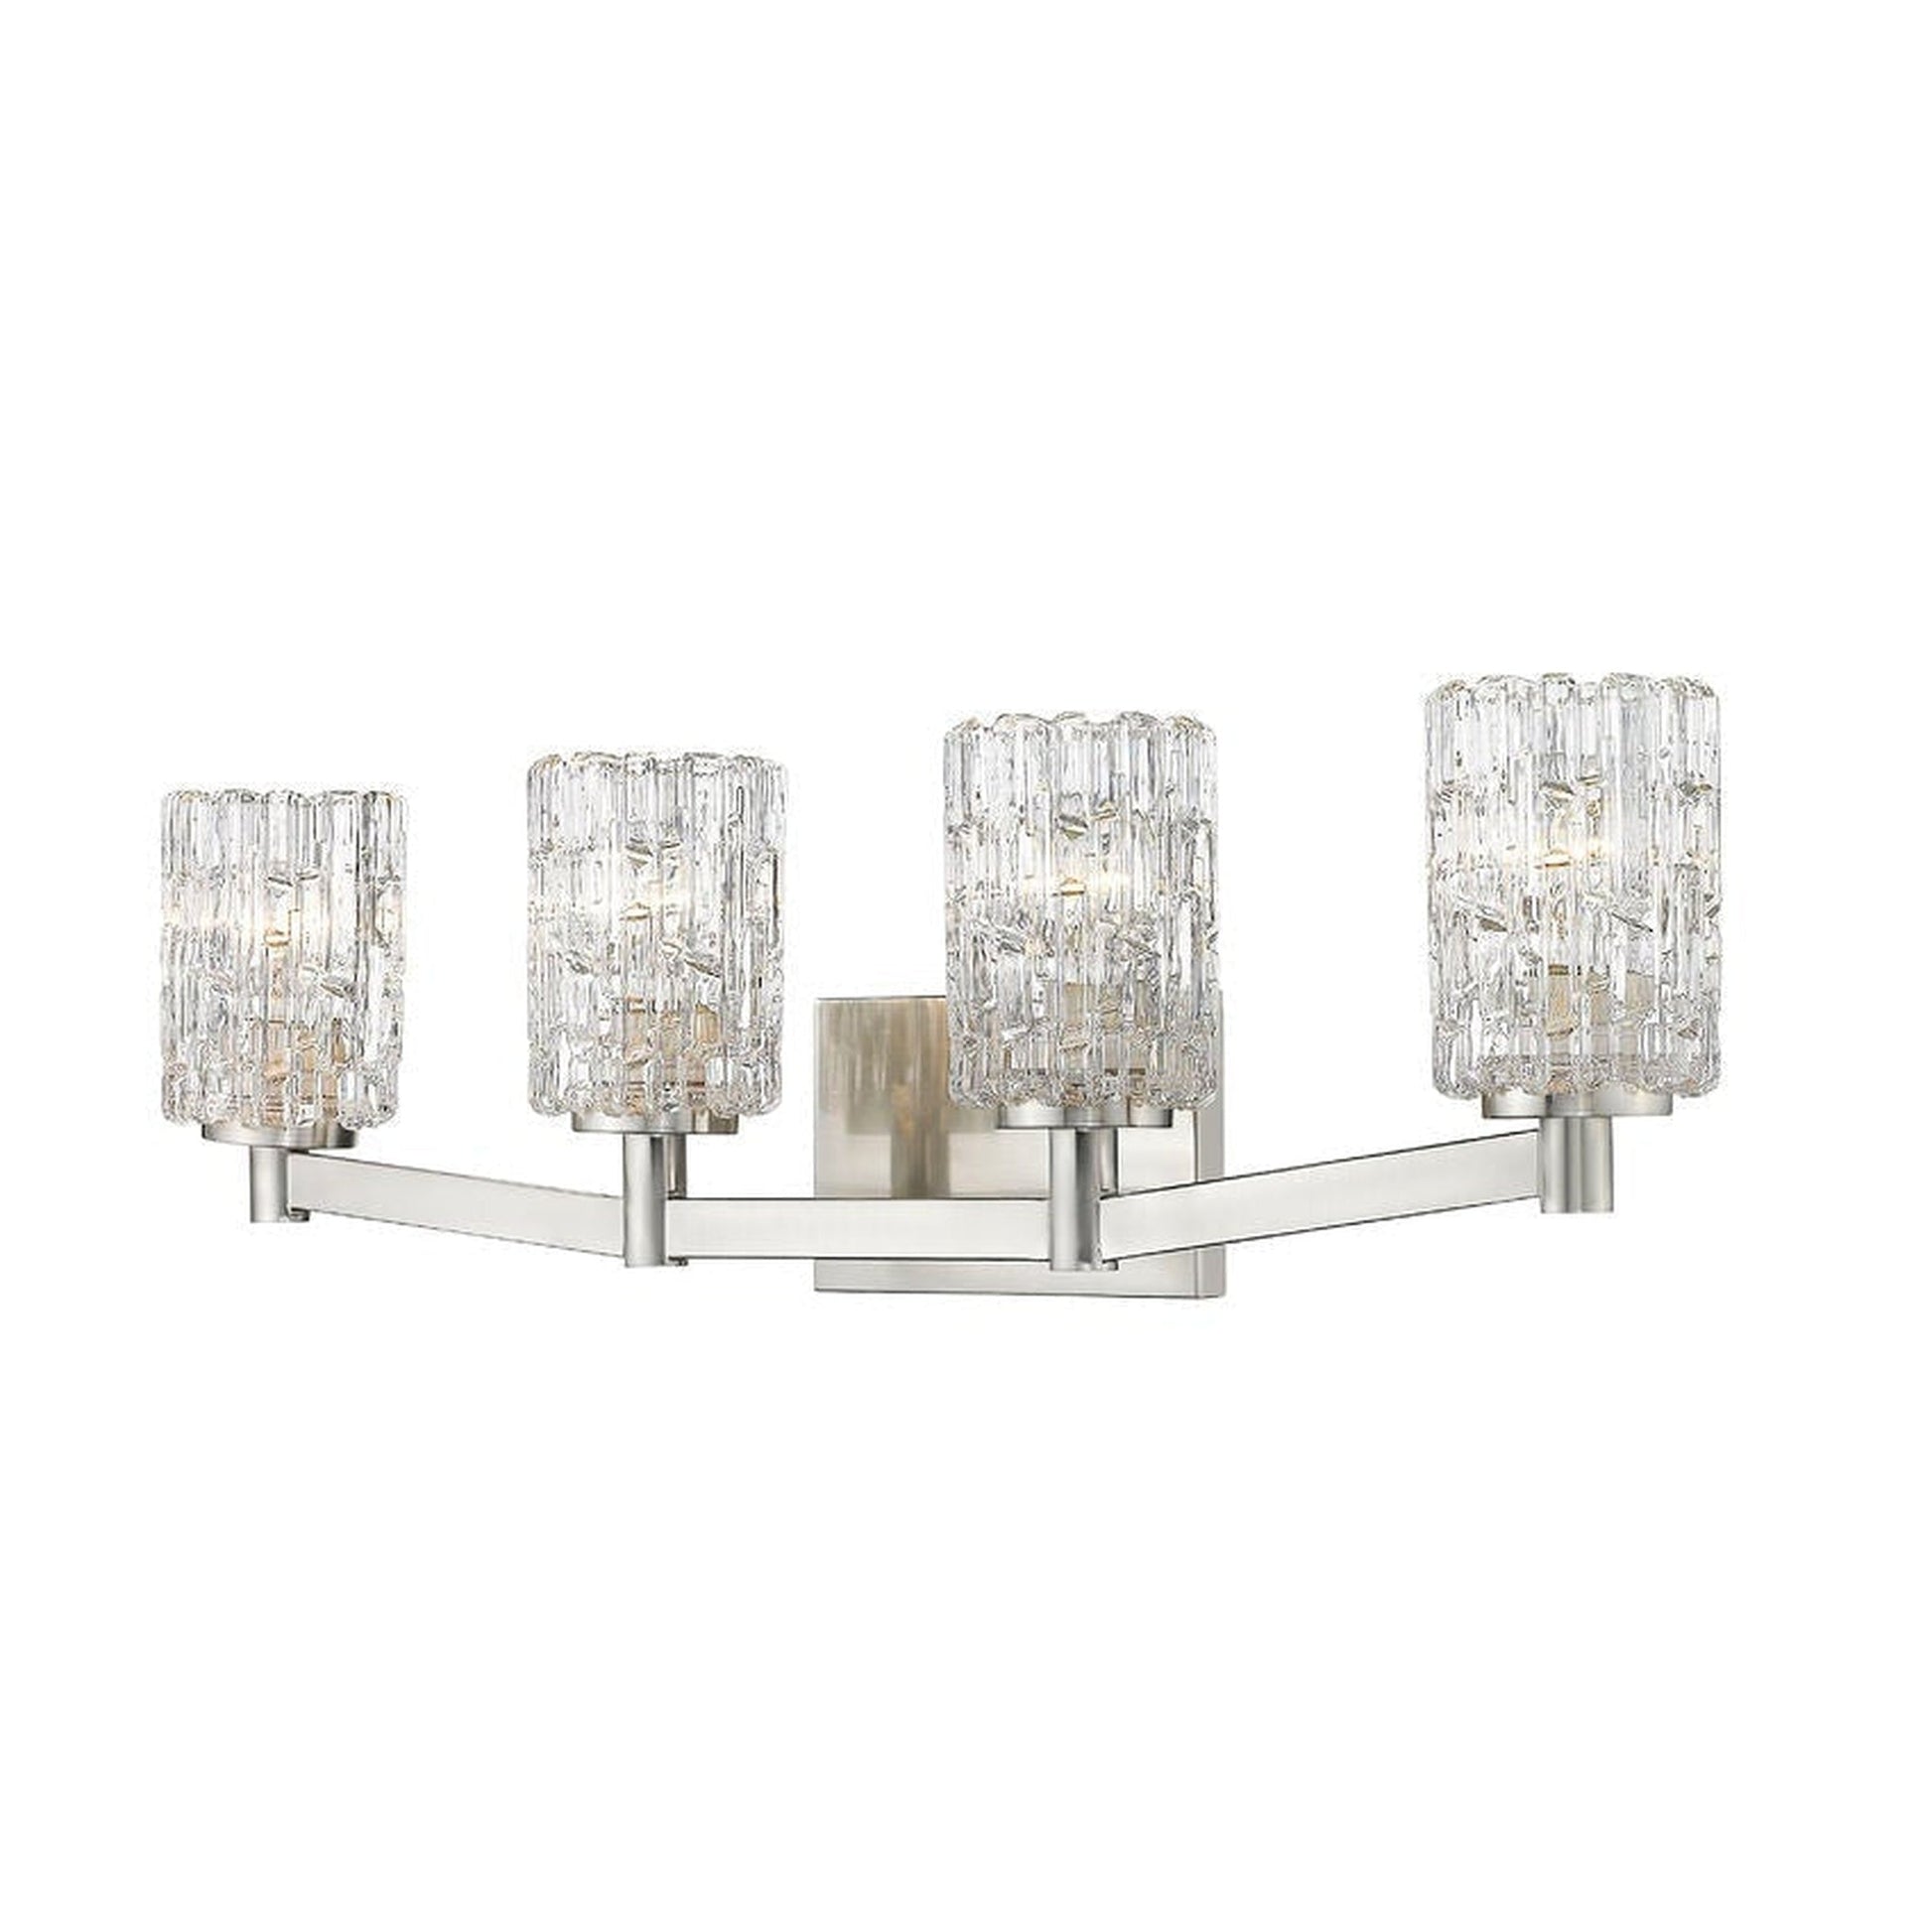 Z-Lite Aubrey 32" 4-Light Brushed Nickel Vanity Light With Clear Glass Shade